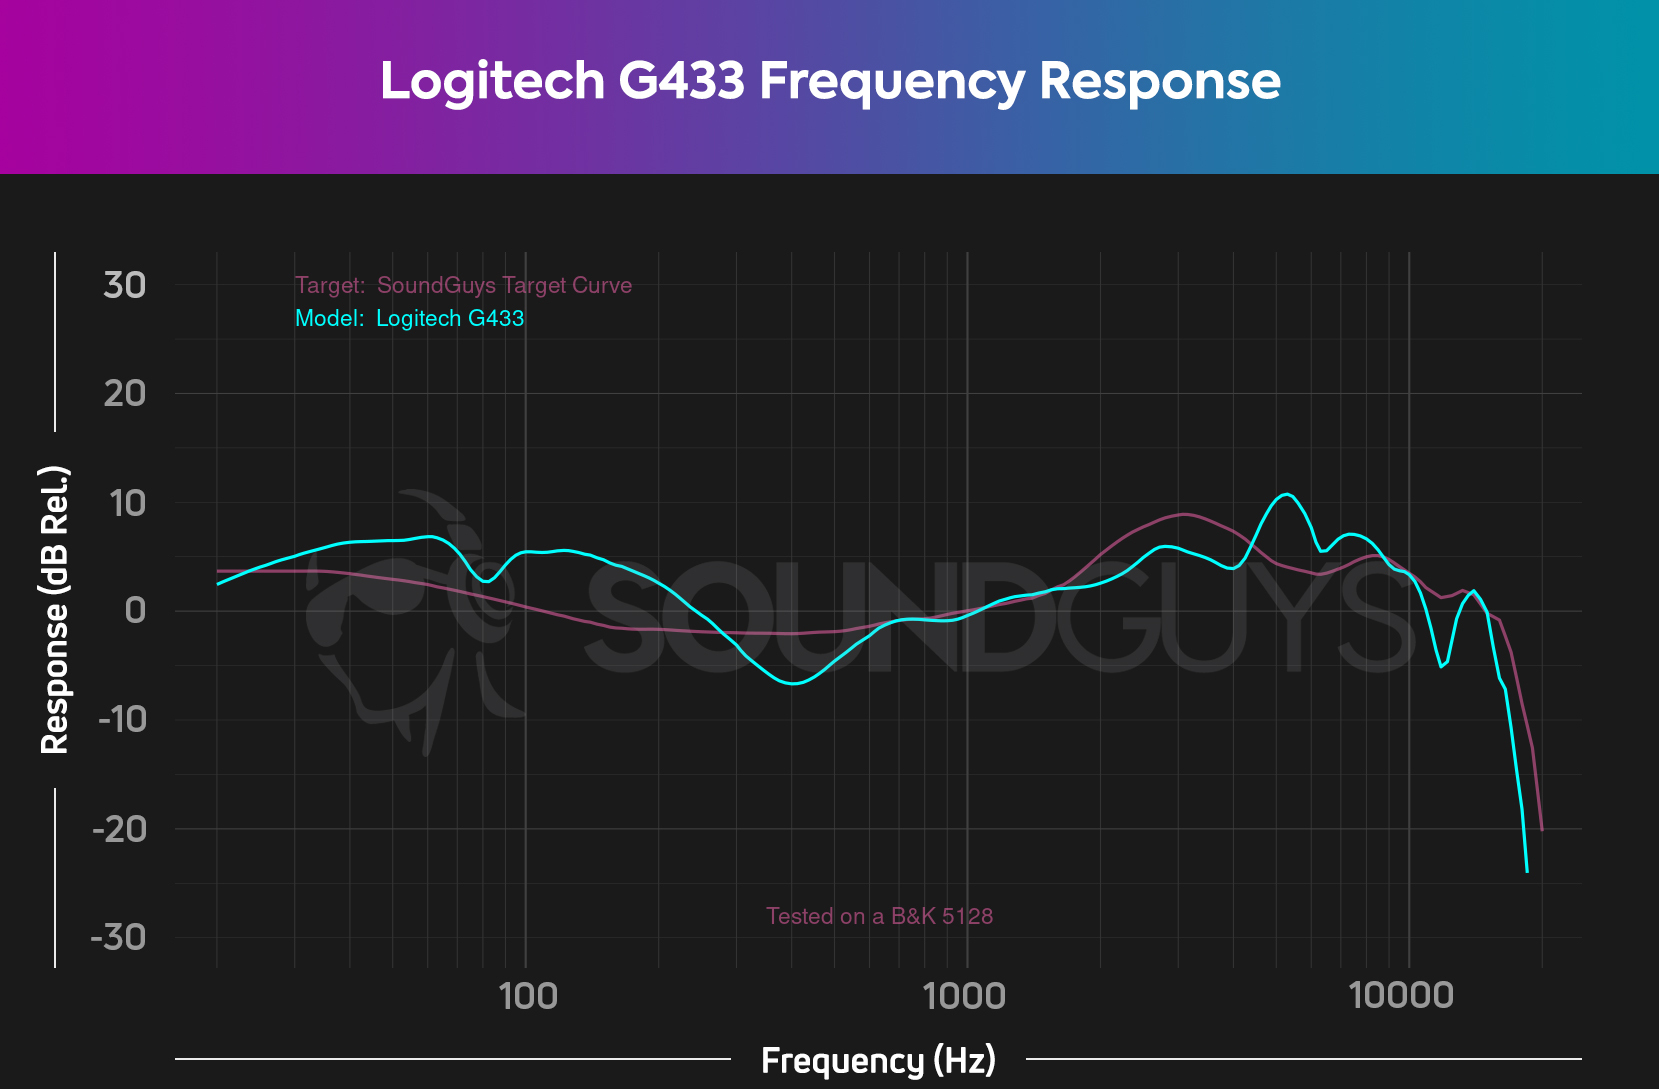 The Logitech G433 frequency response chart showing an emphasis on the bass and the highs and a dip in the low midrange.